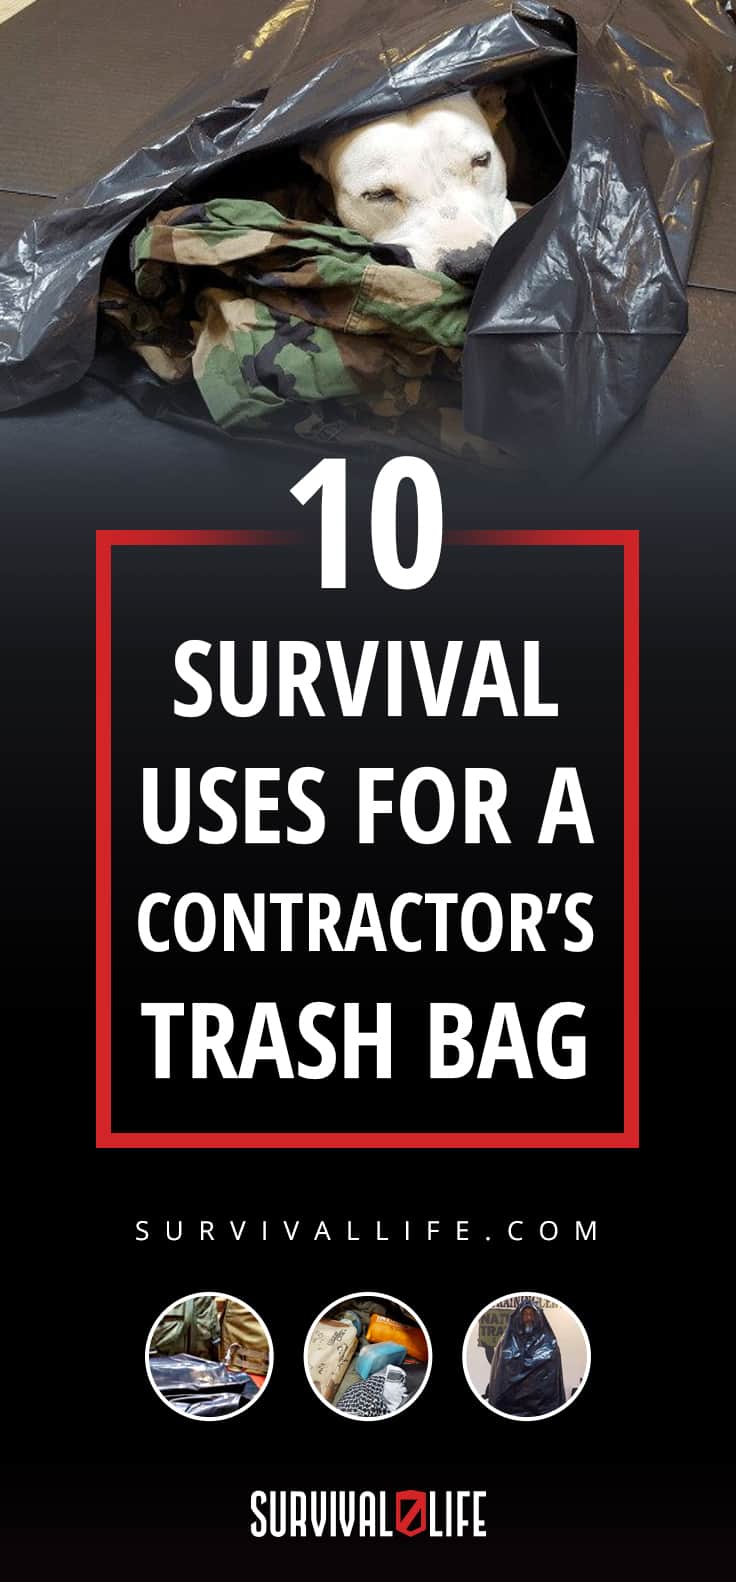 Pinterest Placard | Survival Uses For A Contractor's Trash Bag